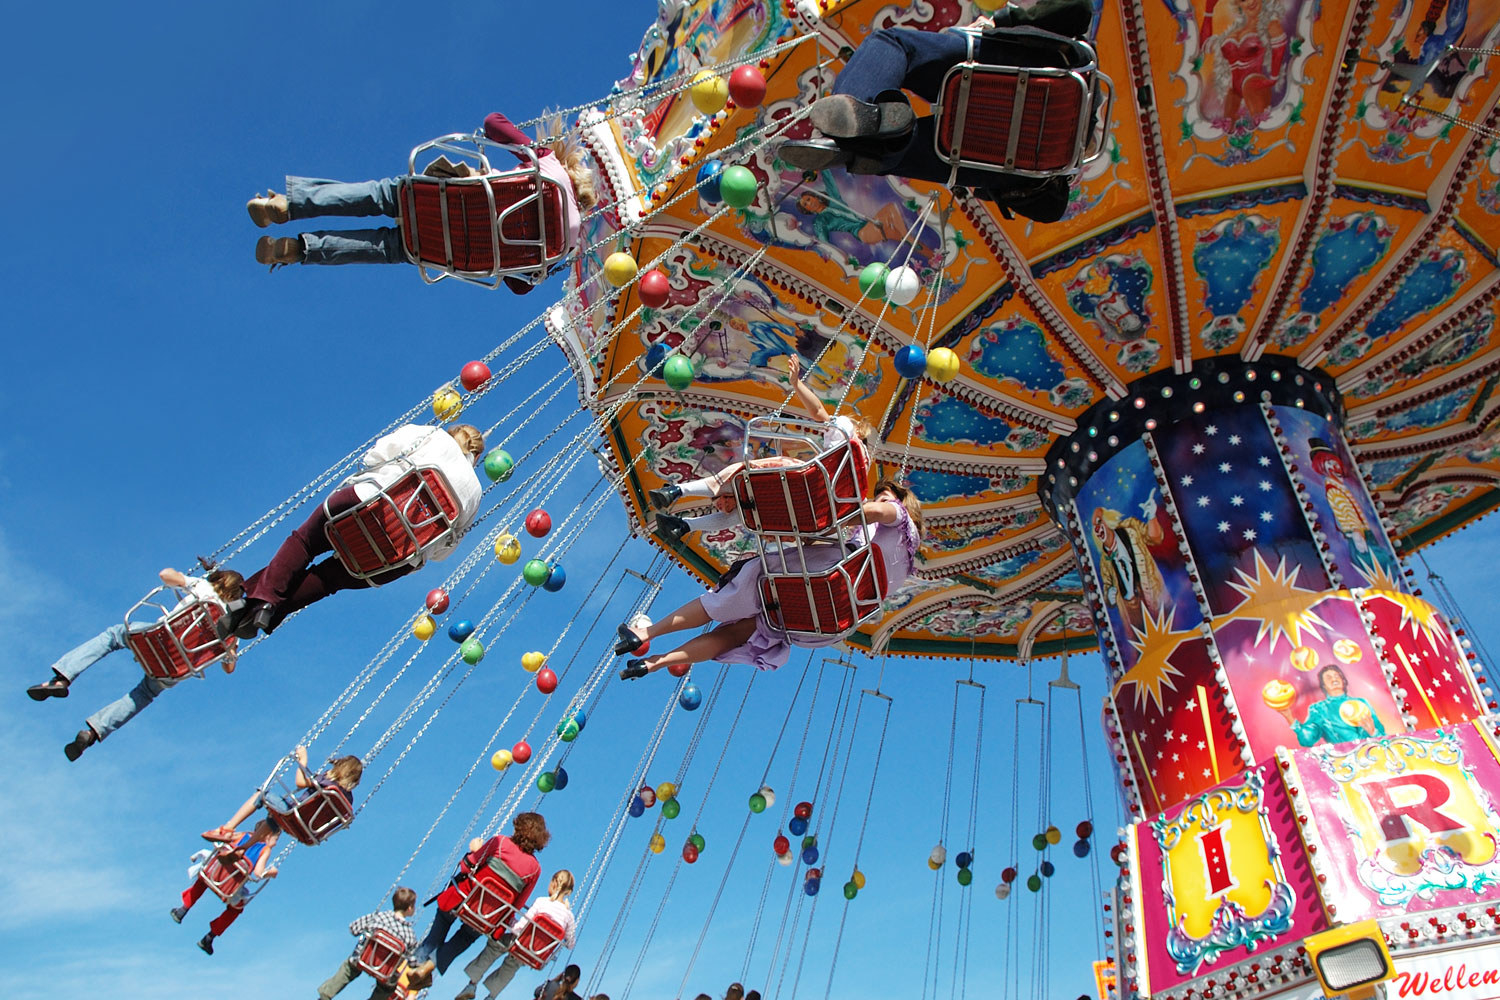 A flying carousel ride at an amusement park.